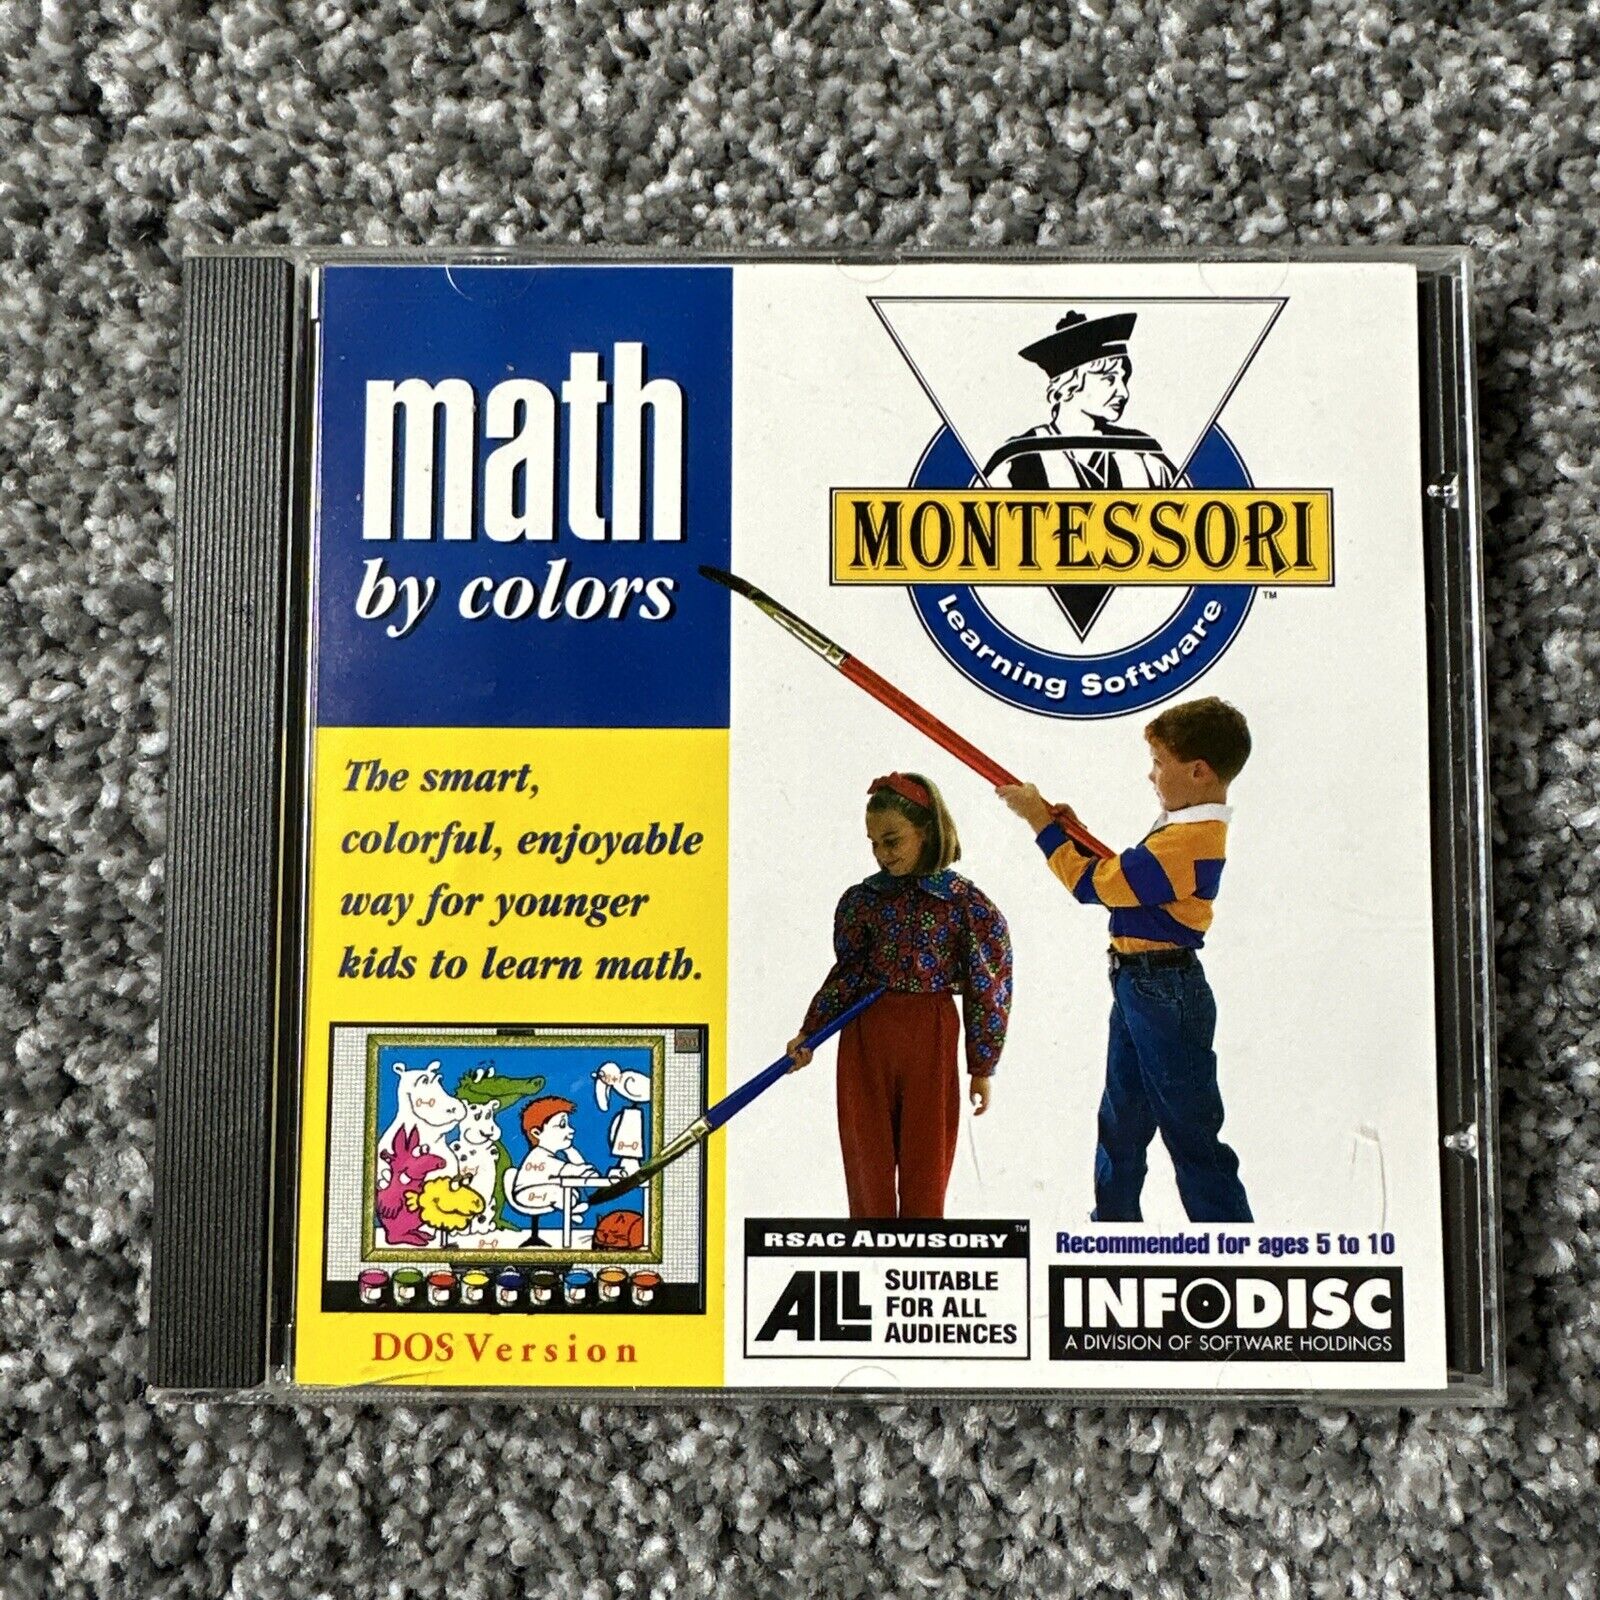 Montessori Learning Software Math By Colors CD-ROM Rare 1994 Infodisc